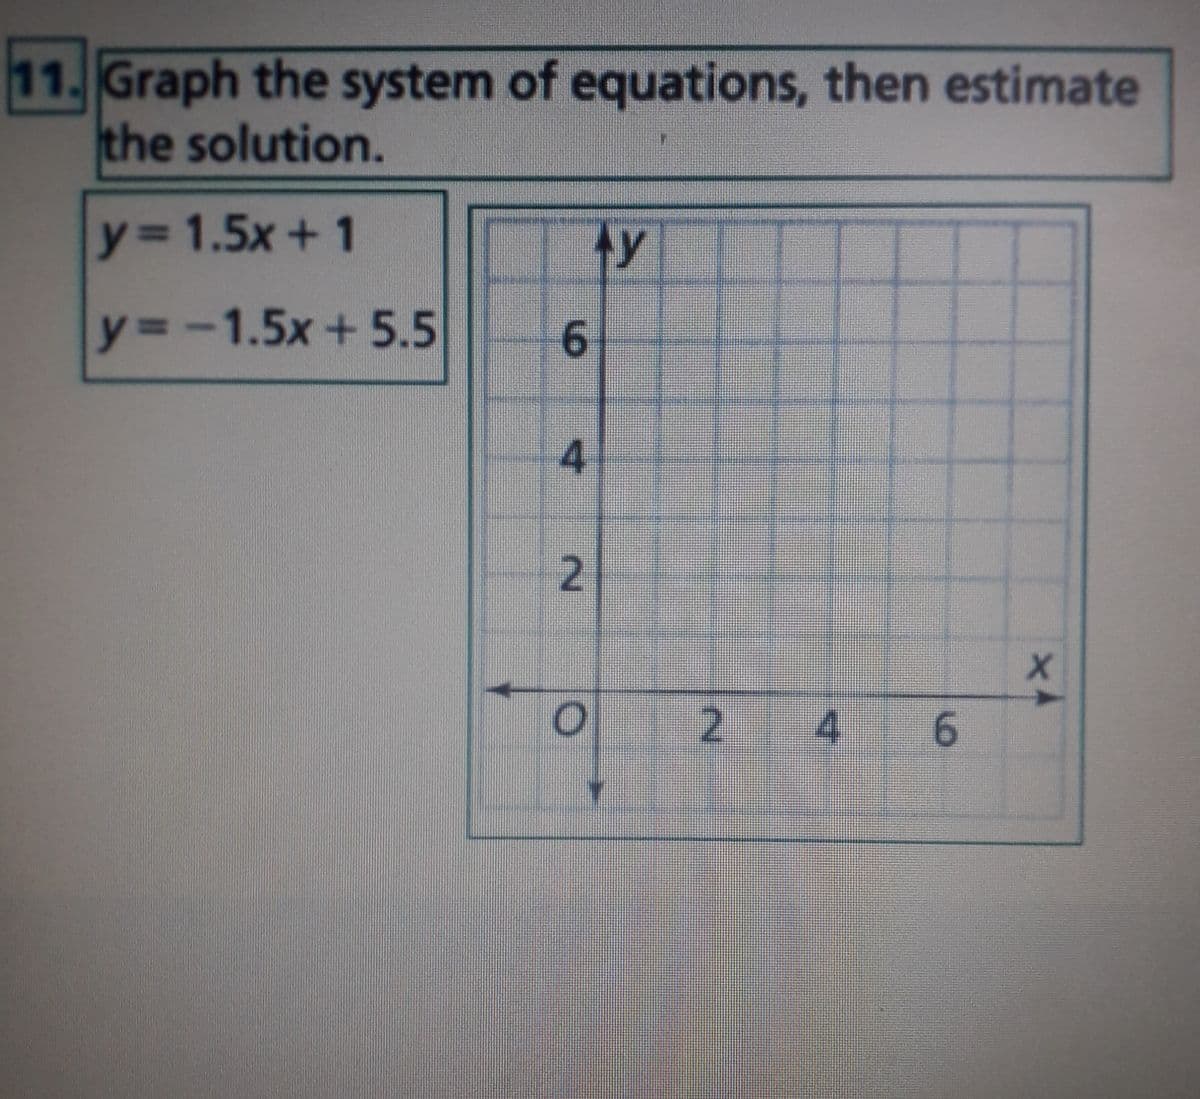 11. Graph the system of equations, then estimate
the solution.
Y3D1.5x+1
ty
y3-1.5x+5.5
6.
4.
2.
2.
4
6.
